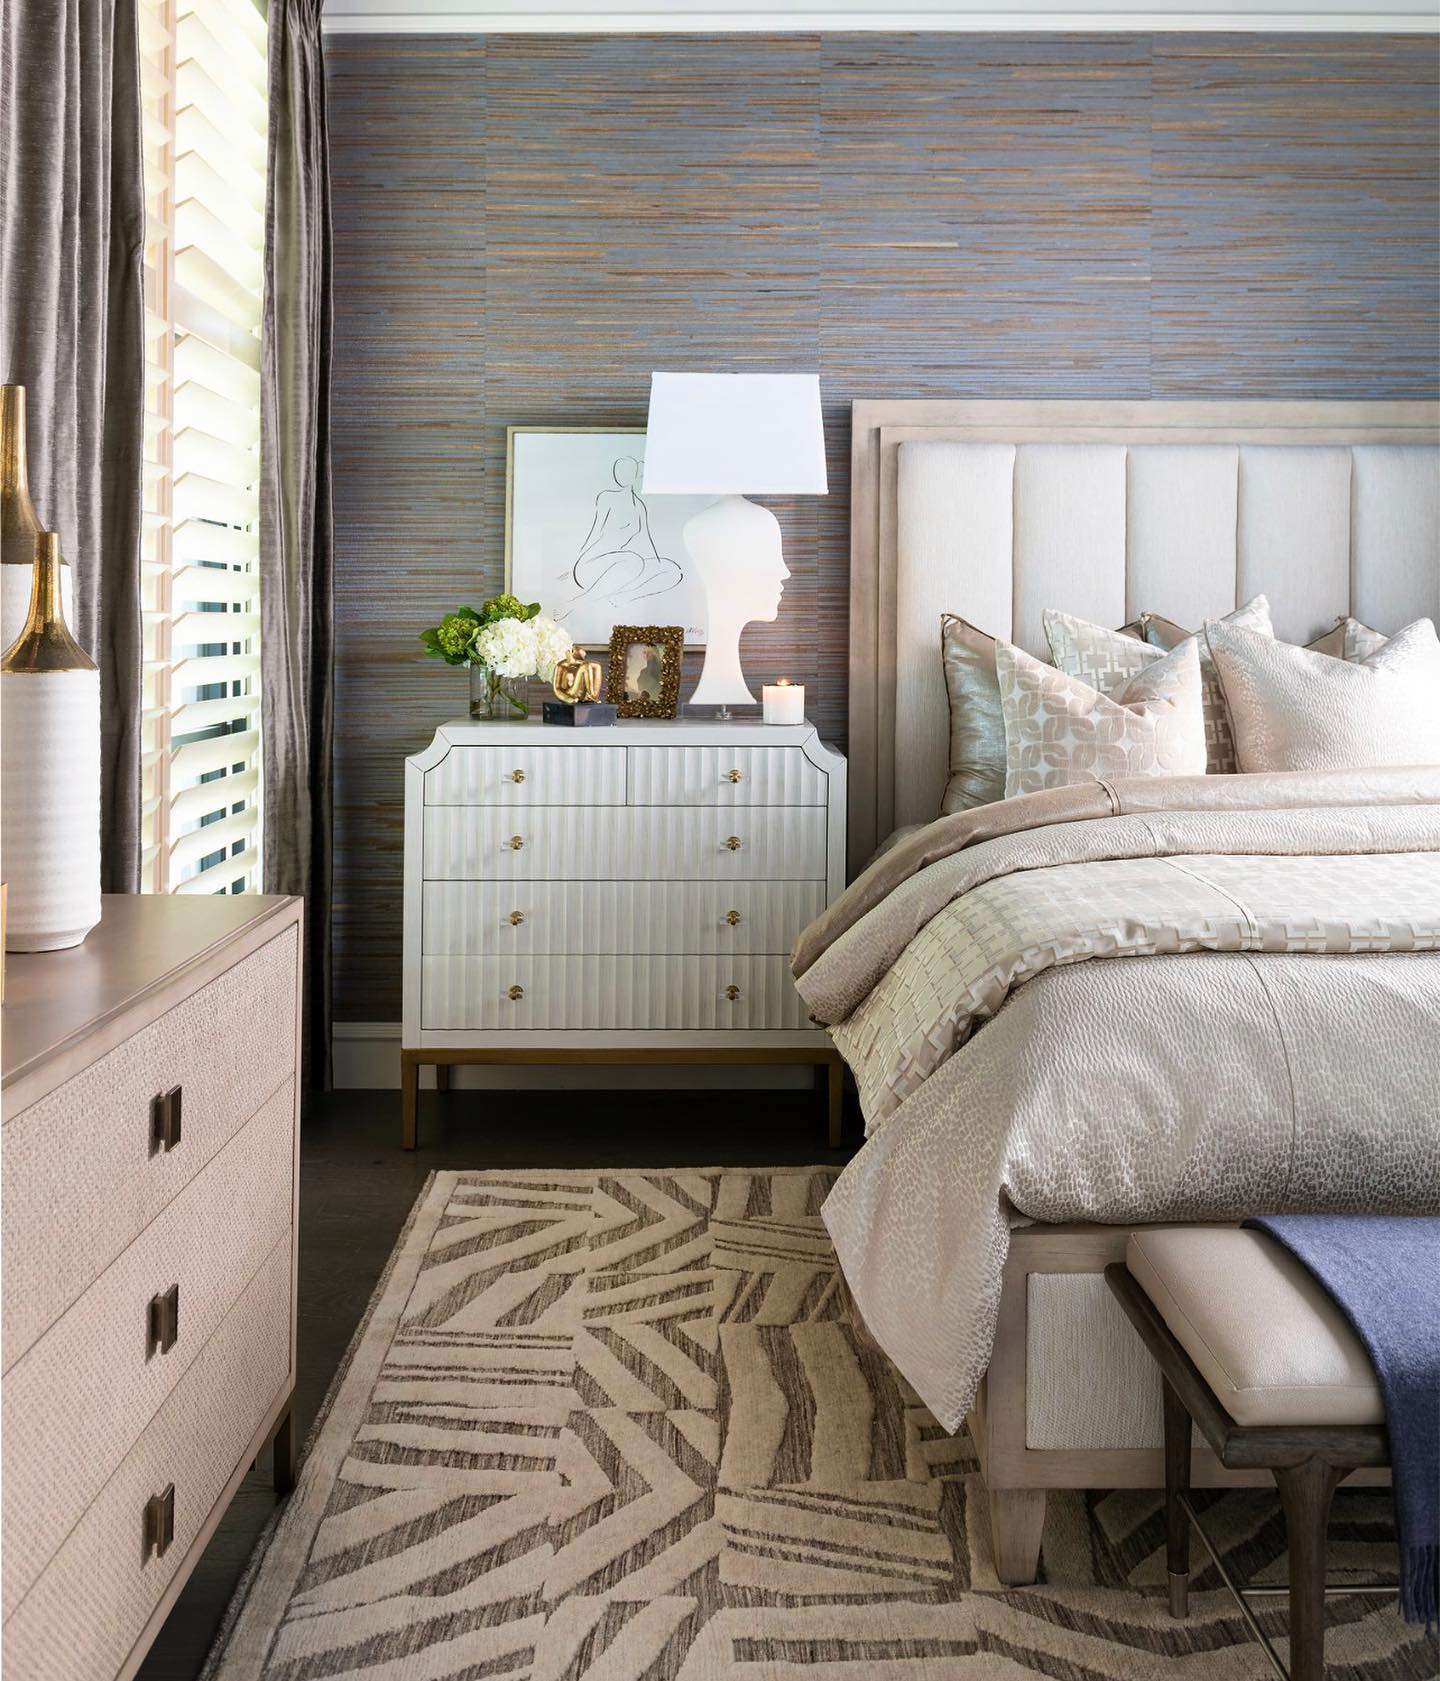 Layers of textures combined with a #neutralpalette - yes please!! See more of this peaceful #primarysuite in the #springissue of #IBBatHome. Design by #ibbdesigner Kay Lewis. All furnishings & accessories available through our store in #Frisco. #interiordesign #Dallasdesign #custombedding #neutralcolors #layeredinterior #bedroomdesign #teamIBB #ibbdesign